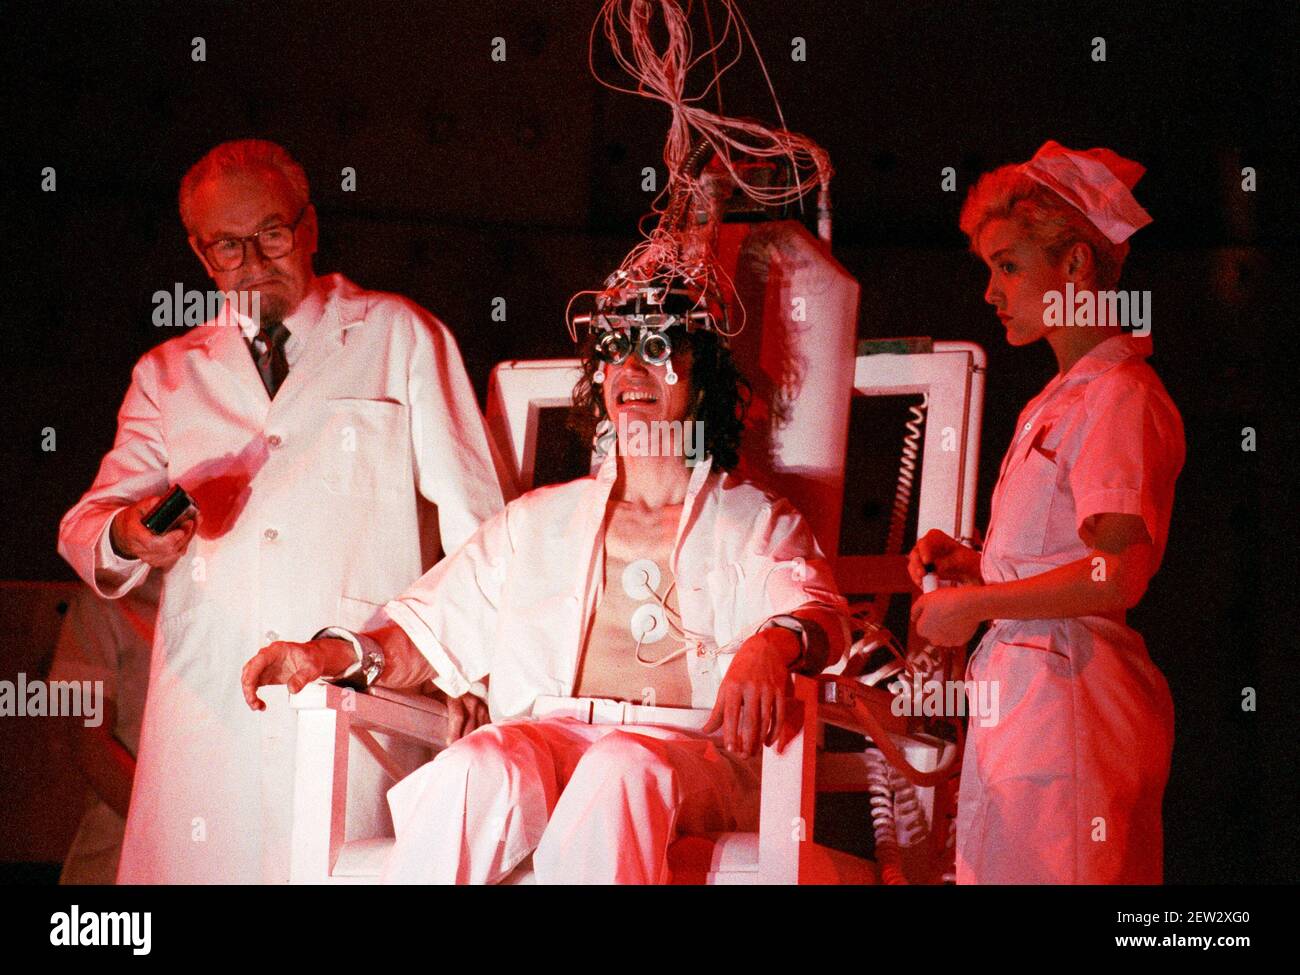 undergoing aversion therapy - l-r: Russell Enoch (Dr Brodsky), Phil Daniels (Alex), Natalie Roles (The Nurse) in A CLOCKWORK ORANGE 2004 at the Royalty Theatre, London WC2  26/05/1990  a Royal Shakespeare Company production  written by Anthony Burgess in collaboration with Ron Daniels  music by The Edge & Bono  design: Richard Hudson  lighting: David Hersey  choreography: Arlene Phillips  fights: Malcolm Ranson  director: Ron Daniels Stock Photo